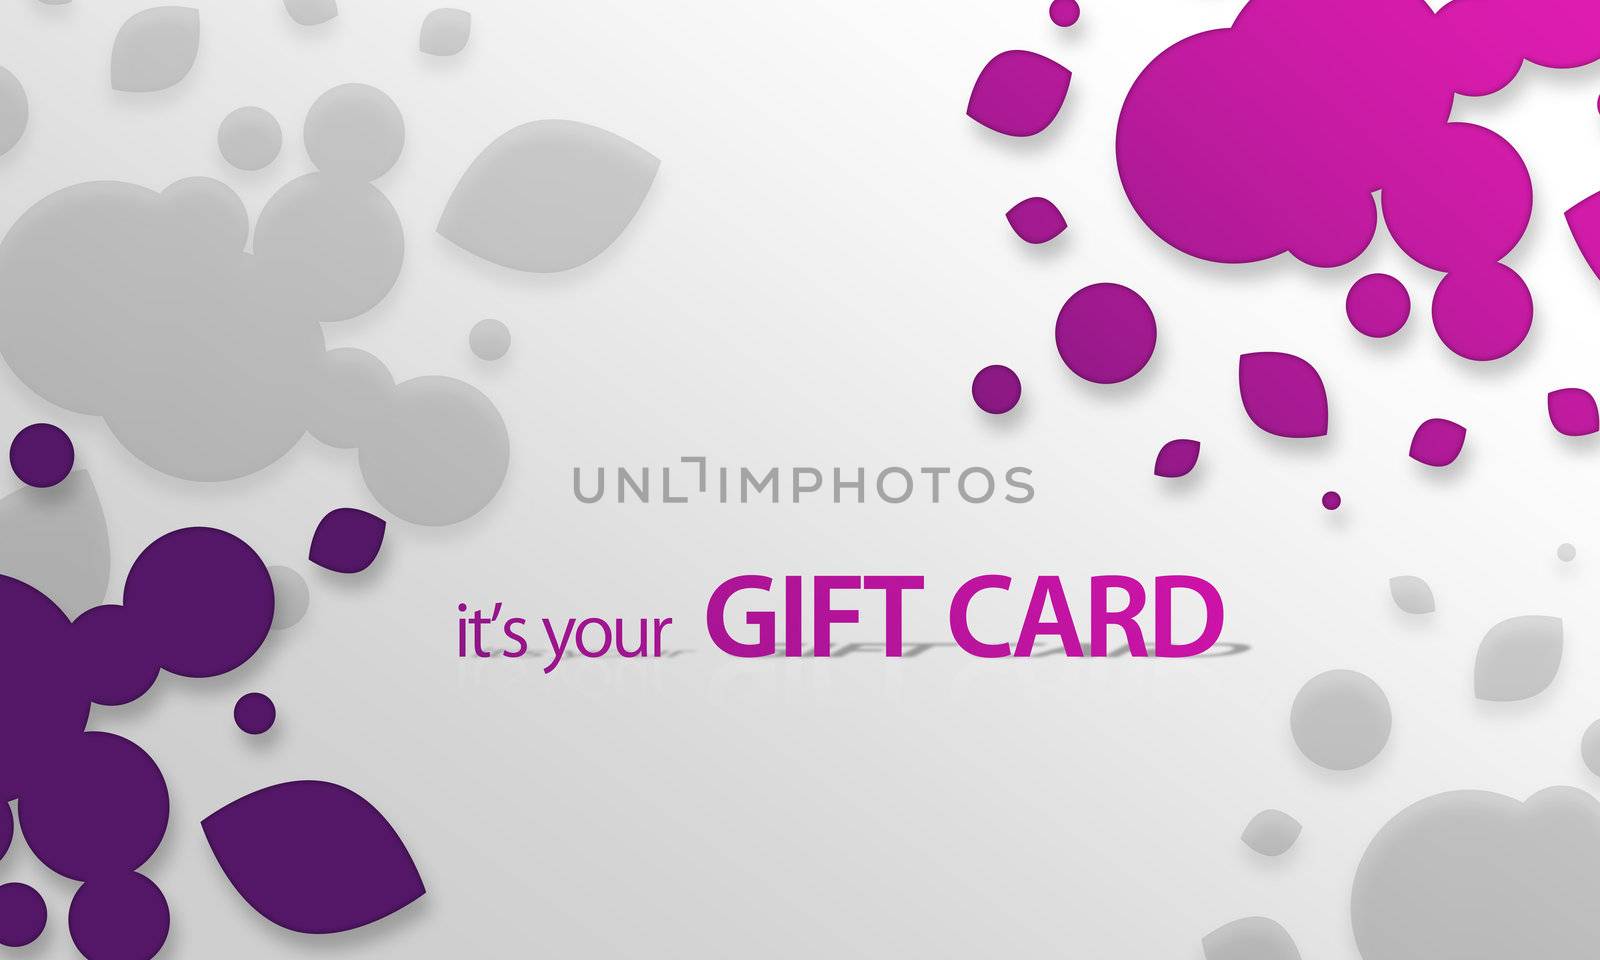 High resolution gift card graphic with pink purple elements ready to print.